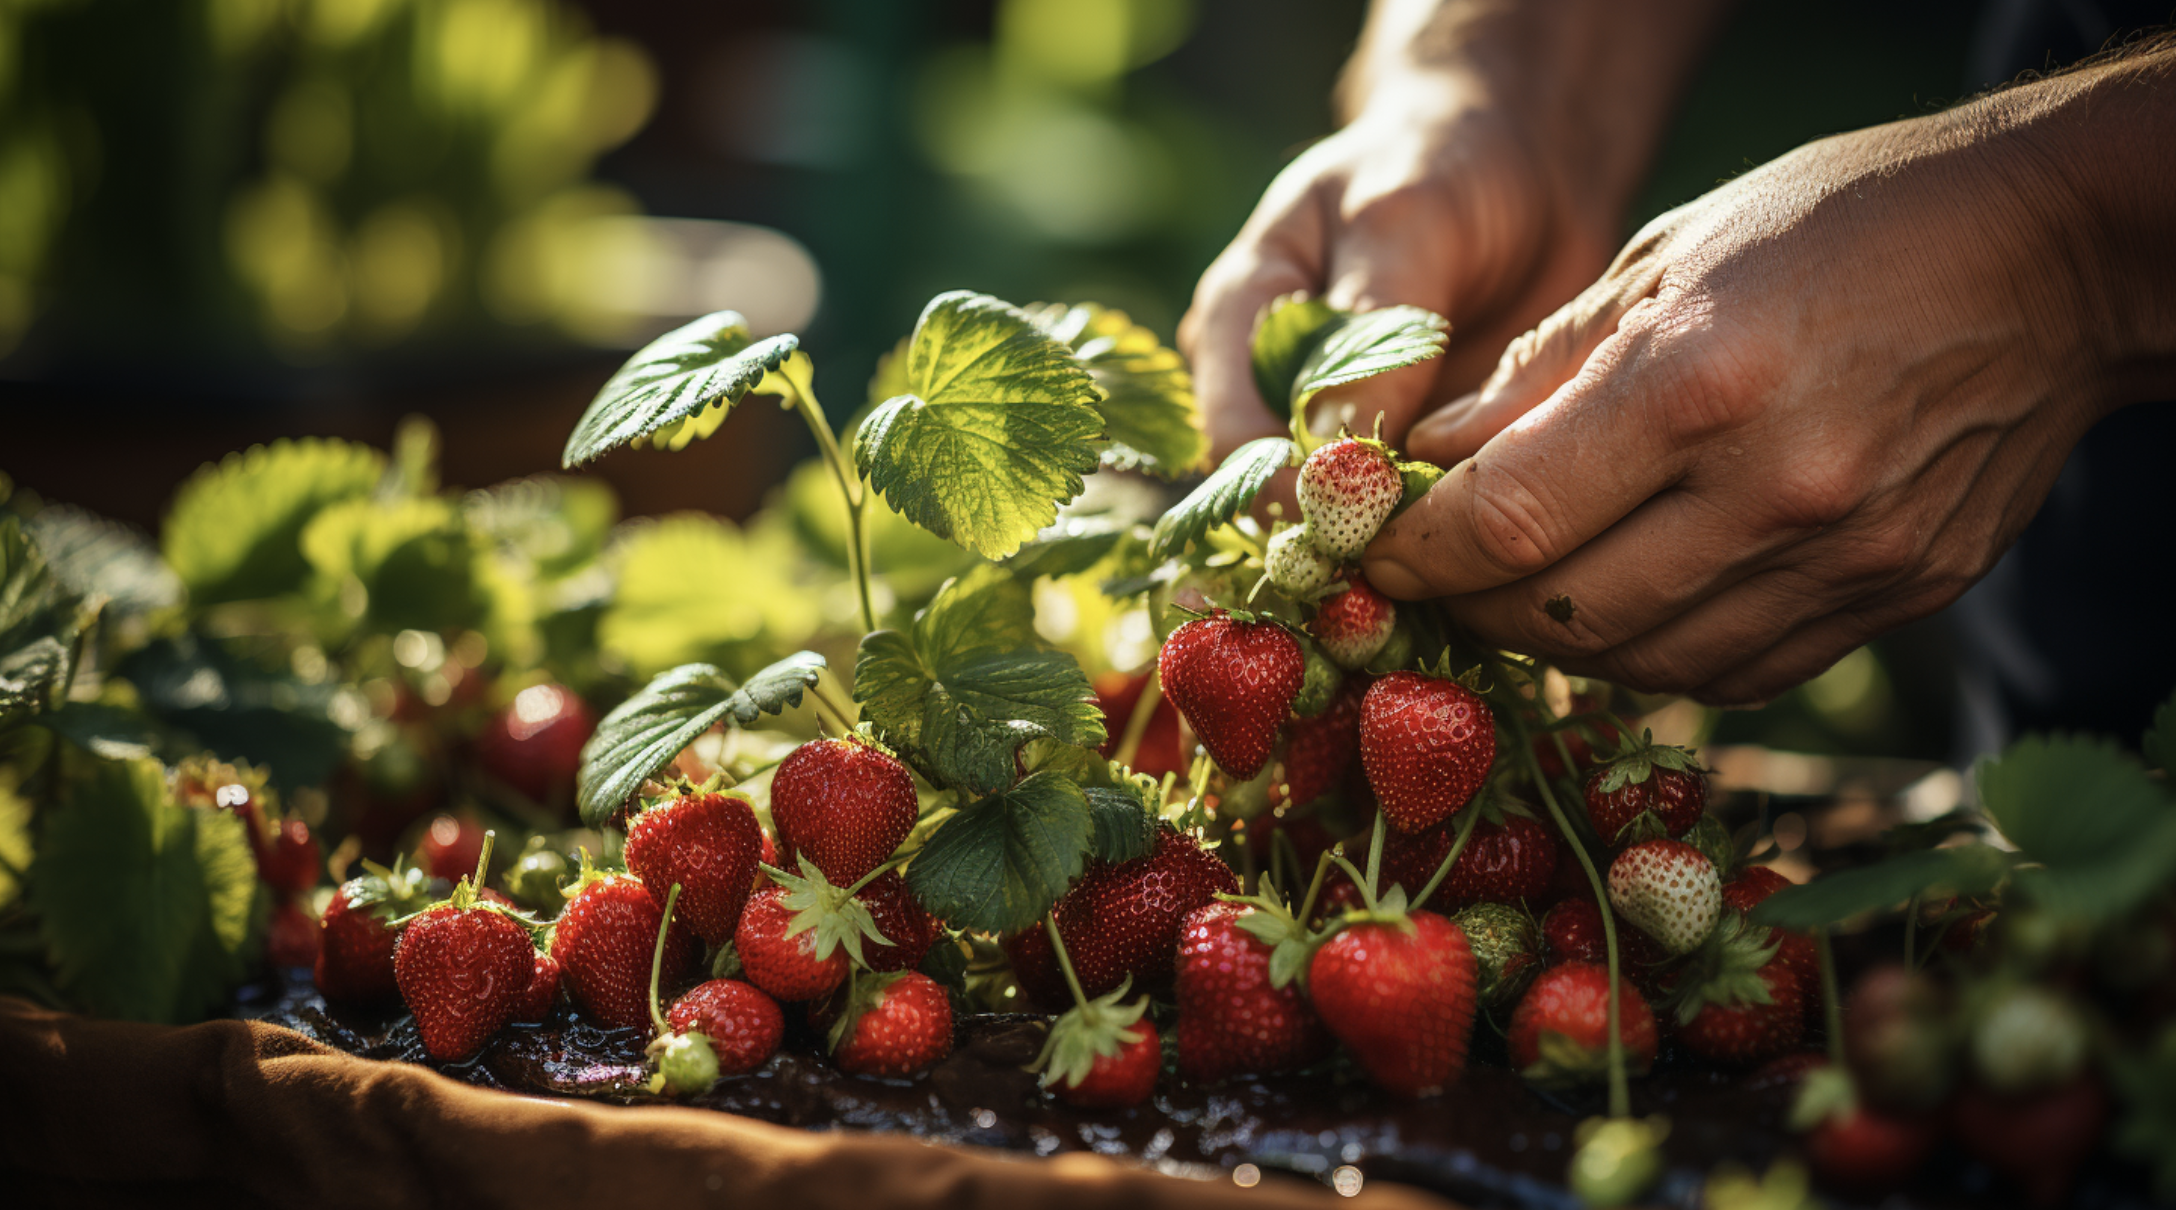 Preparing and Caring for Strawberries Over Winter